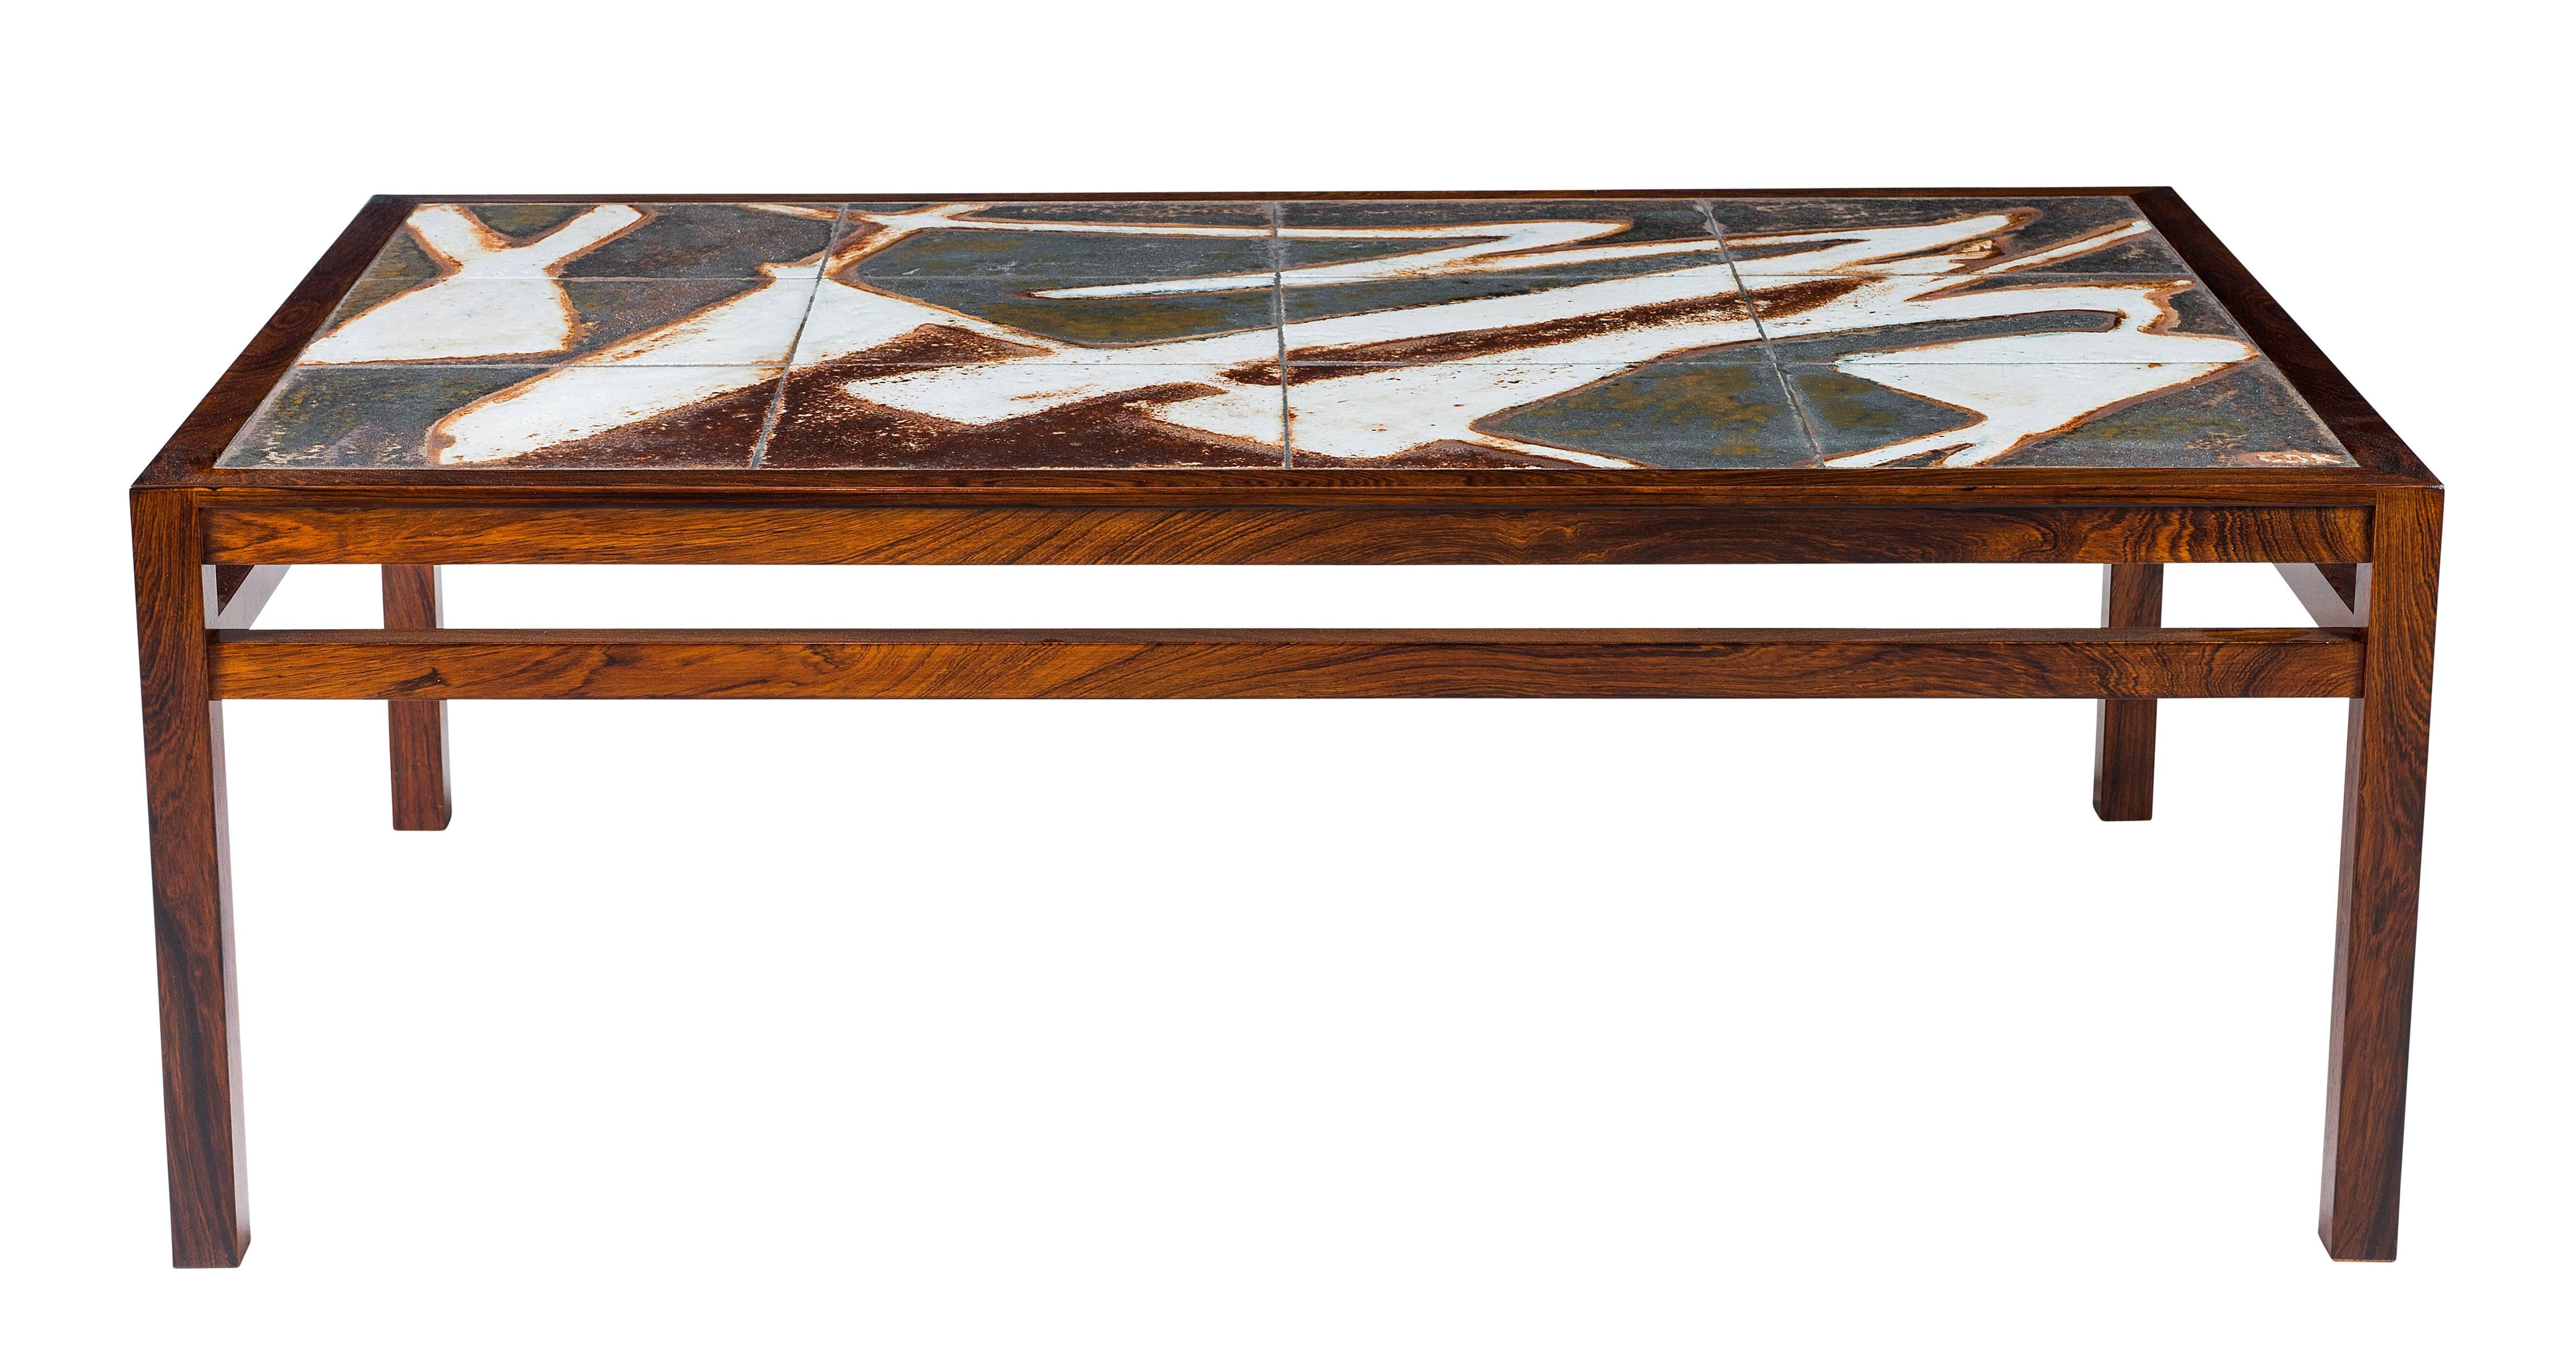 Mid-20th Century Danish Abstract Tile Coffee Table